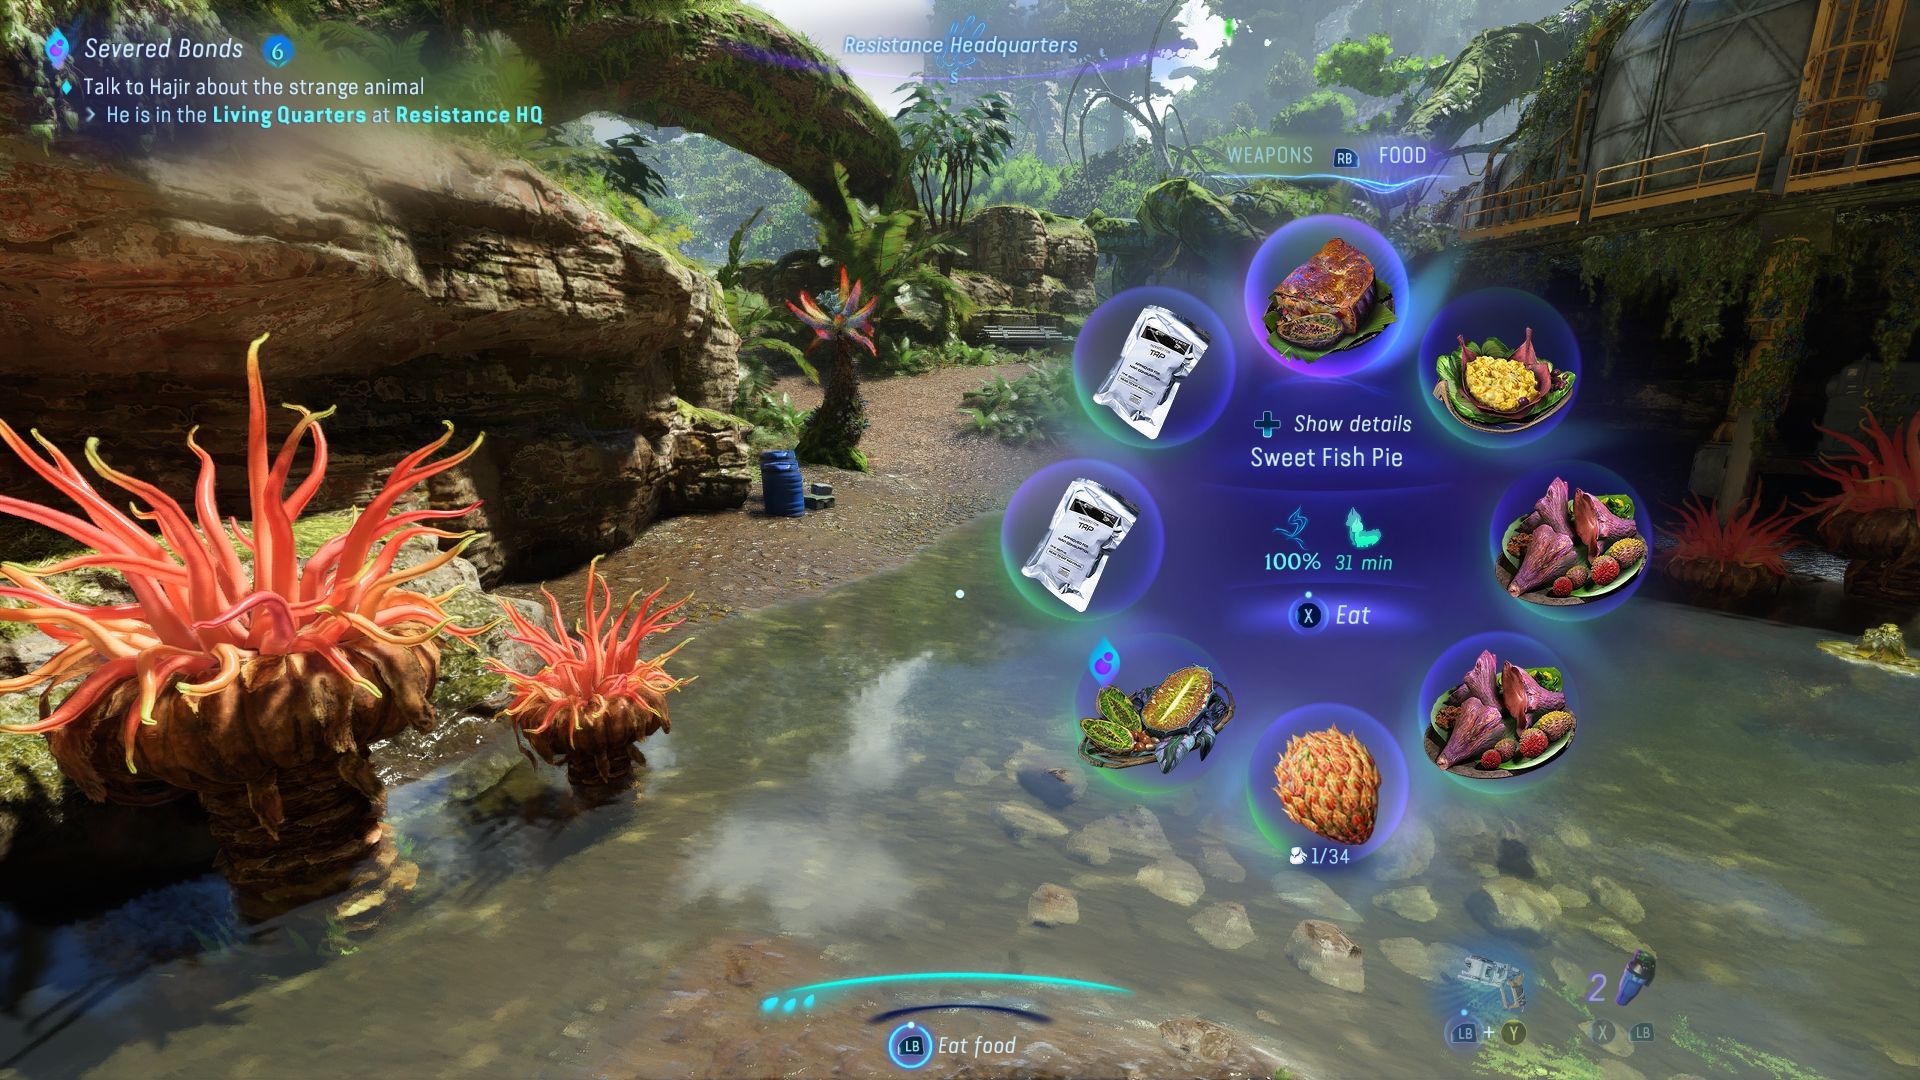 A picture showing the Food wheel Avatar Frontiers of Pandora